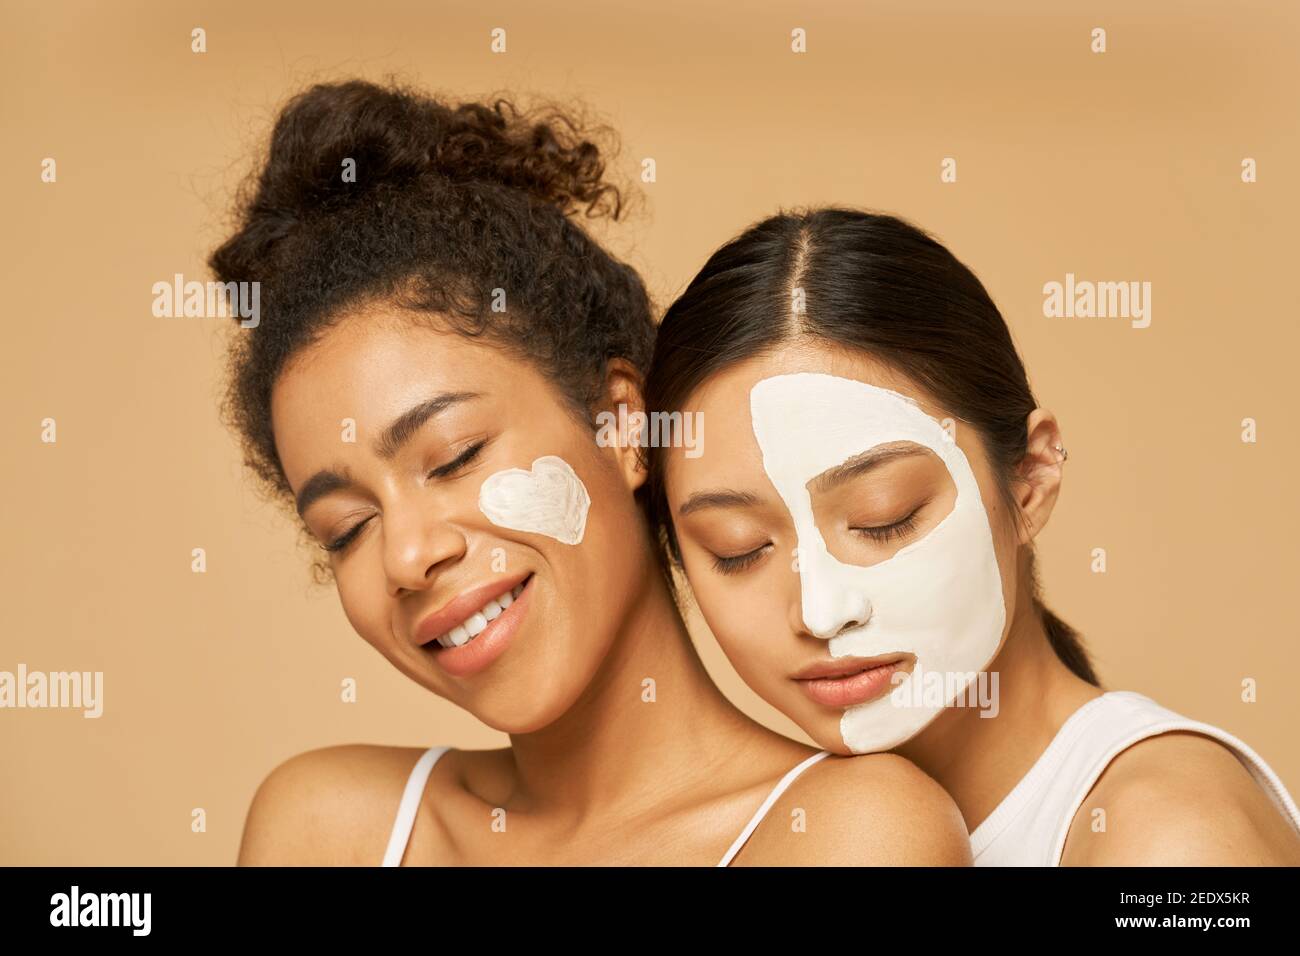 Close up portrait of two young female friends with facial masks on posing with eyes closed isolated over beige background. Skincare, beauty concept Stock Photo